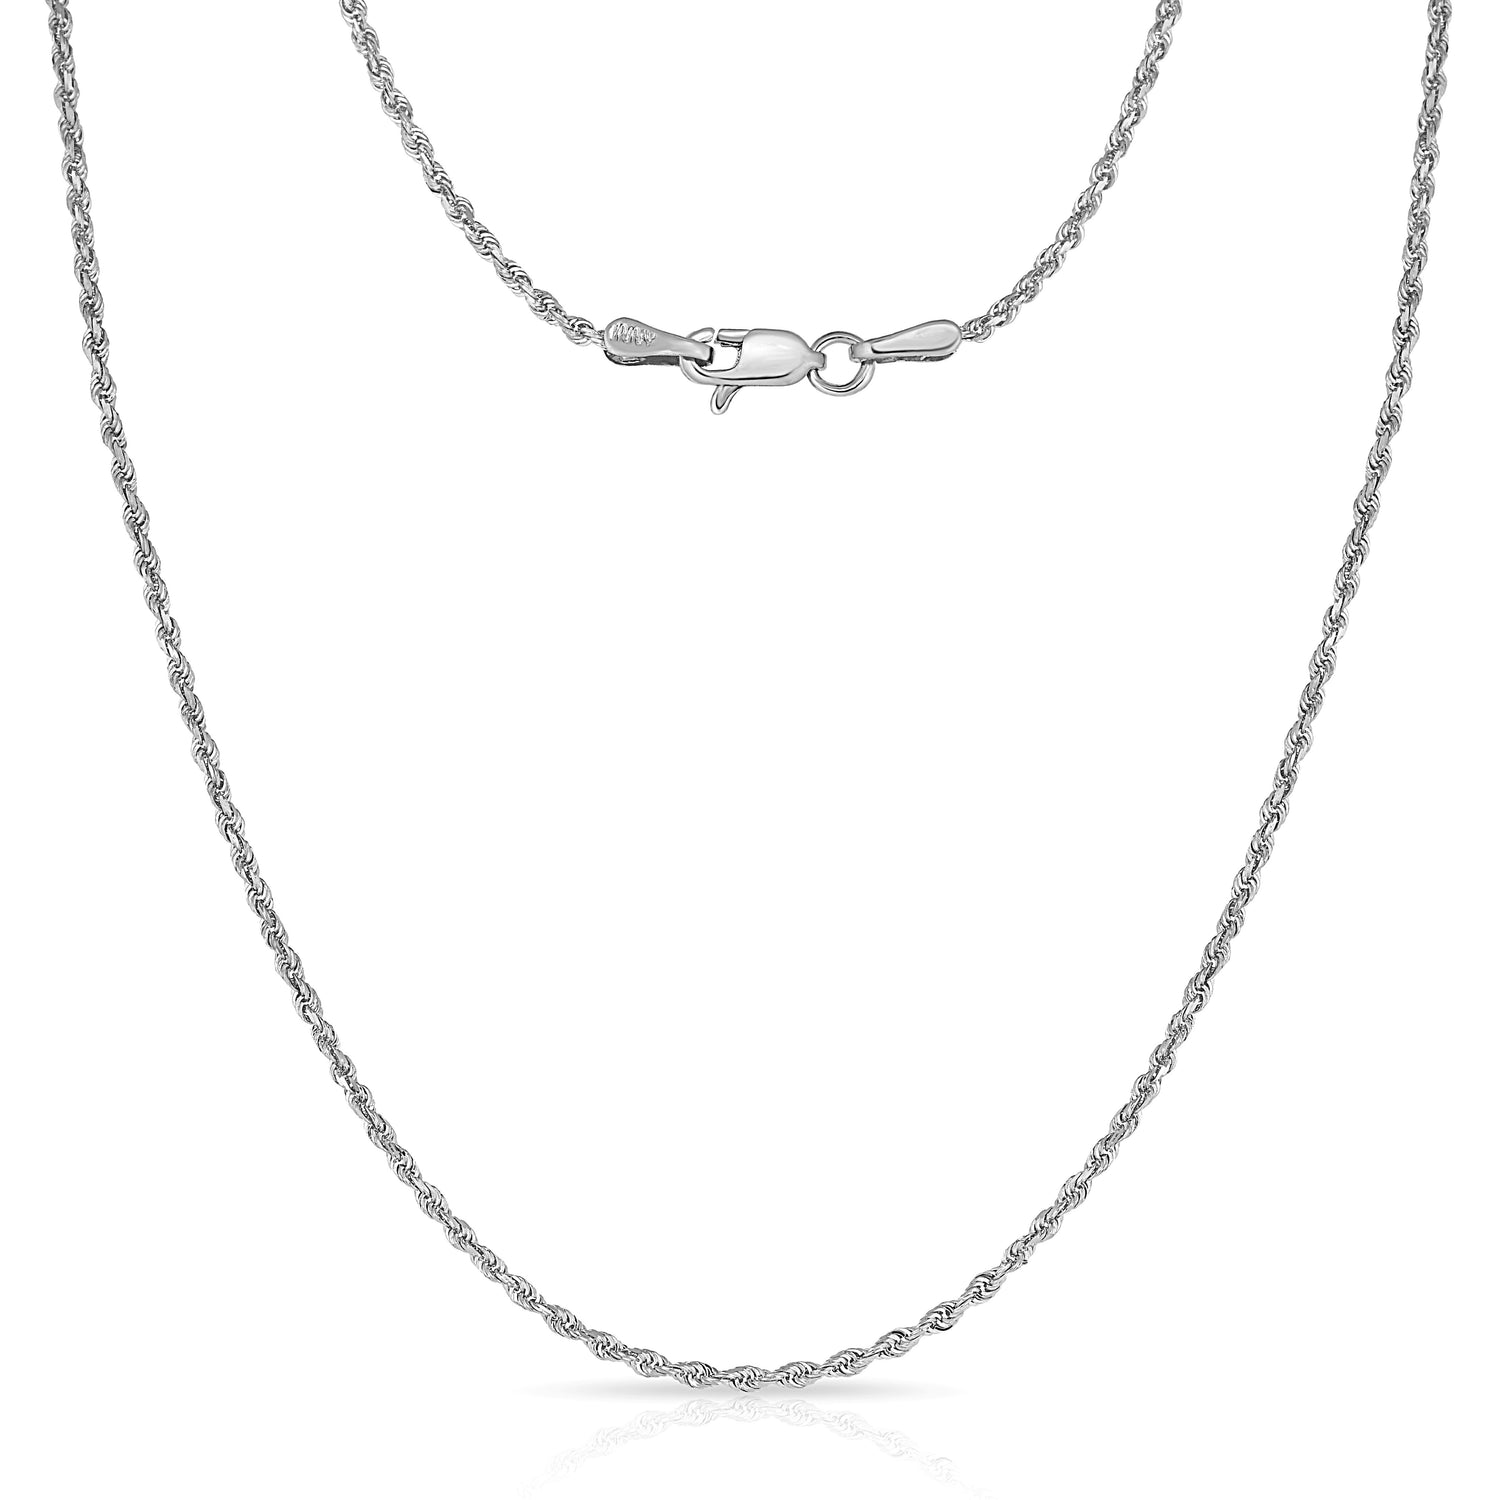 10k White Gold 1.3mm Solid Rope Chain Diamond Cut Necklace